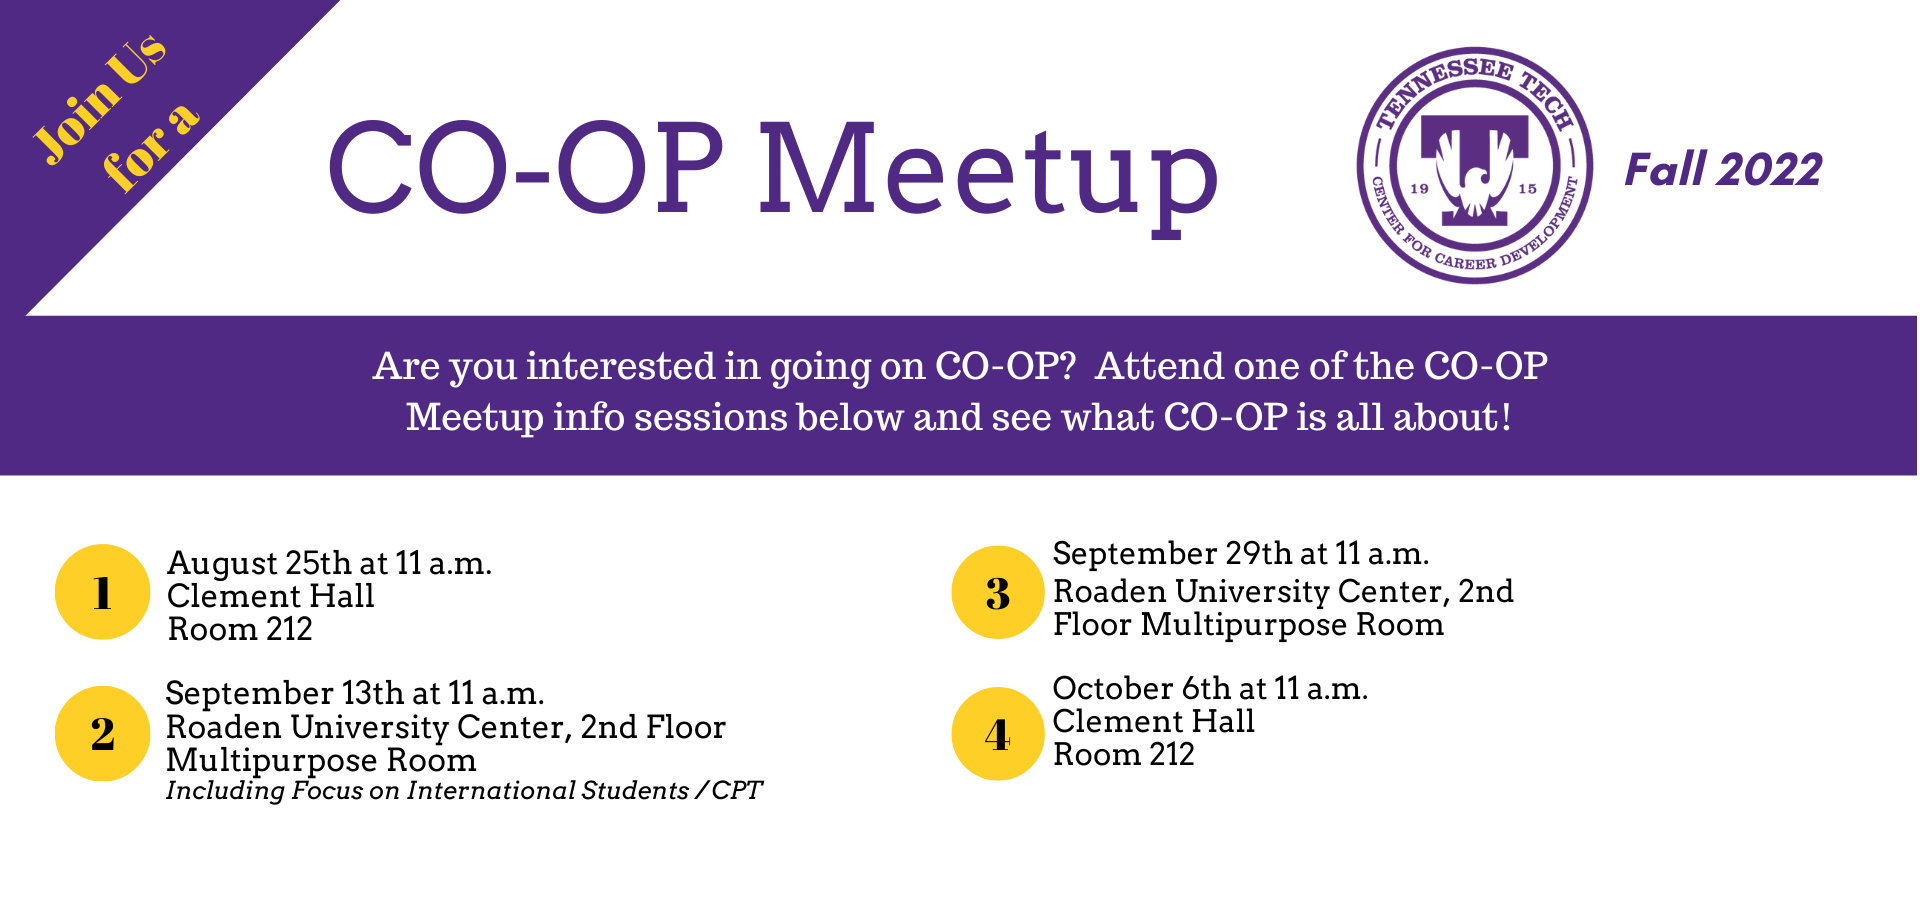 Co-Op Meetup Info Sessions on Aug. 15, Sept. 13, Sept. 29, and Oct. 6